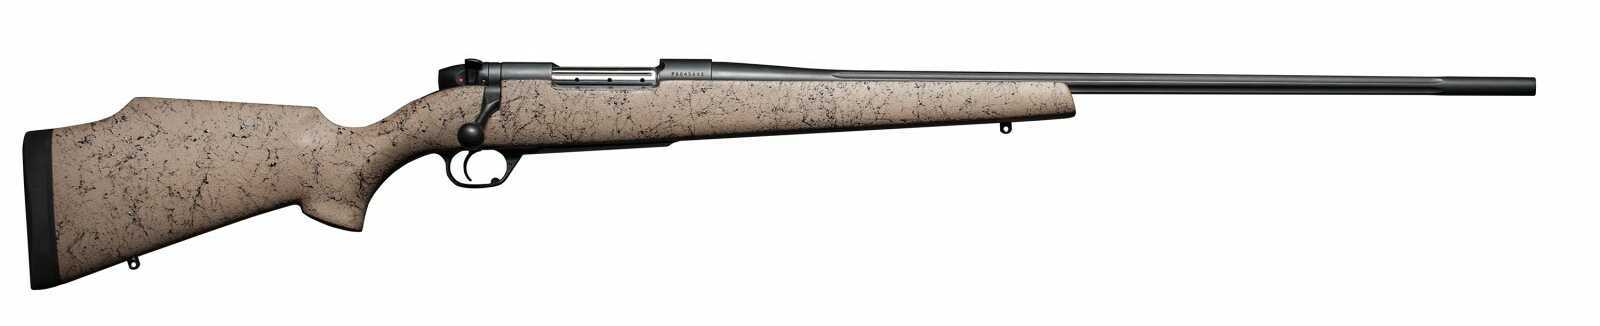 Weatherby Mark V Ultra Lightweight 6.5-300 Magnum Bolt Action Rifle 28" #2 MOD Barrel 3+1 Magazine Capacity Composite Spiderweb Accent Stock Md: MUTM653WR8B